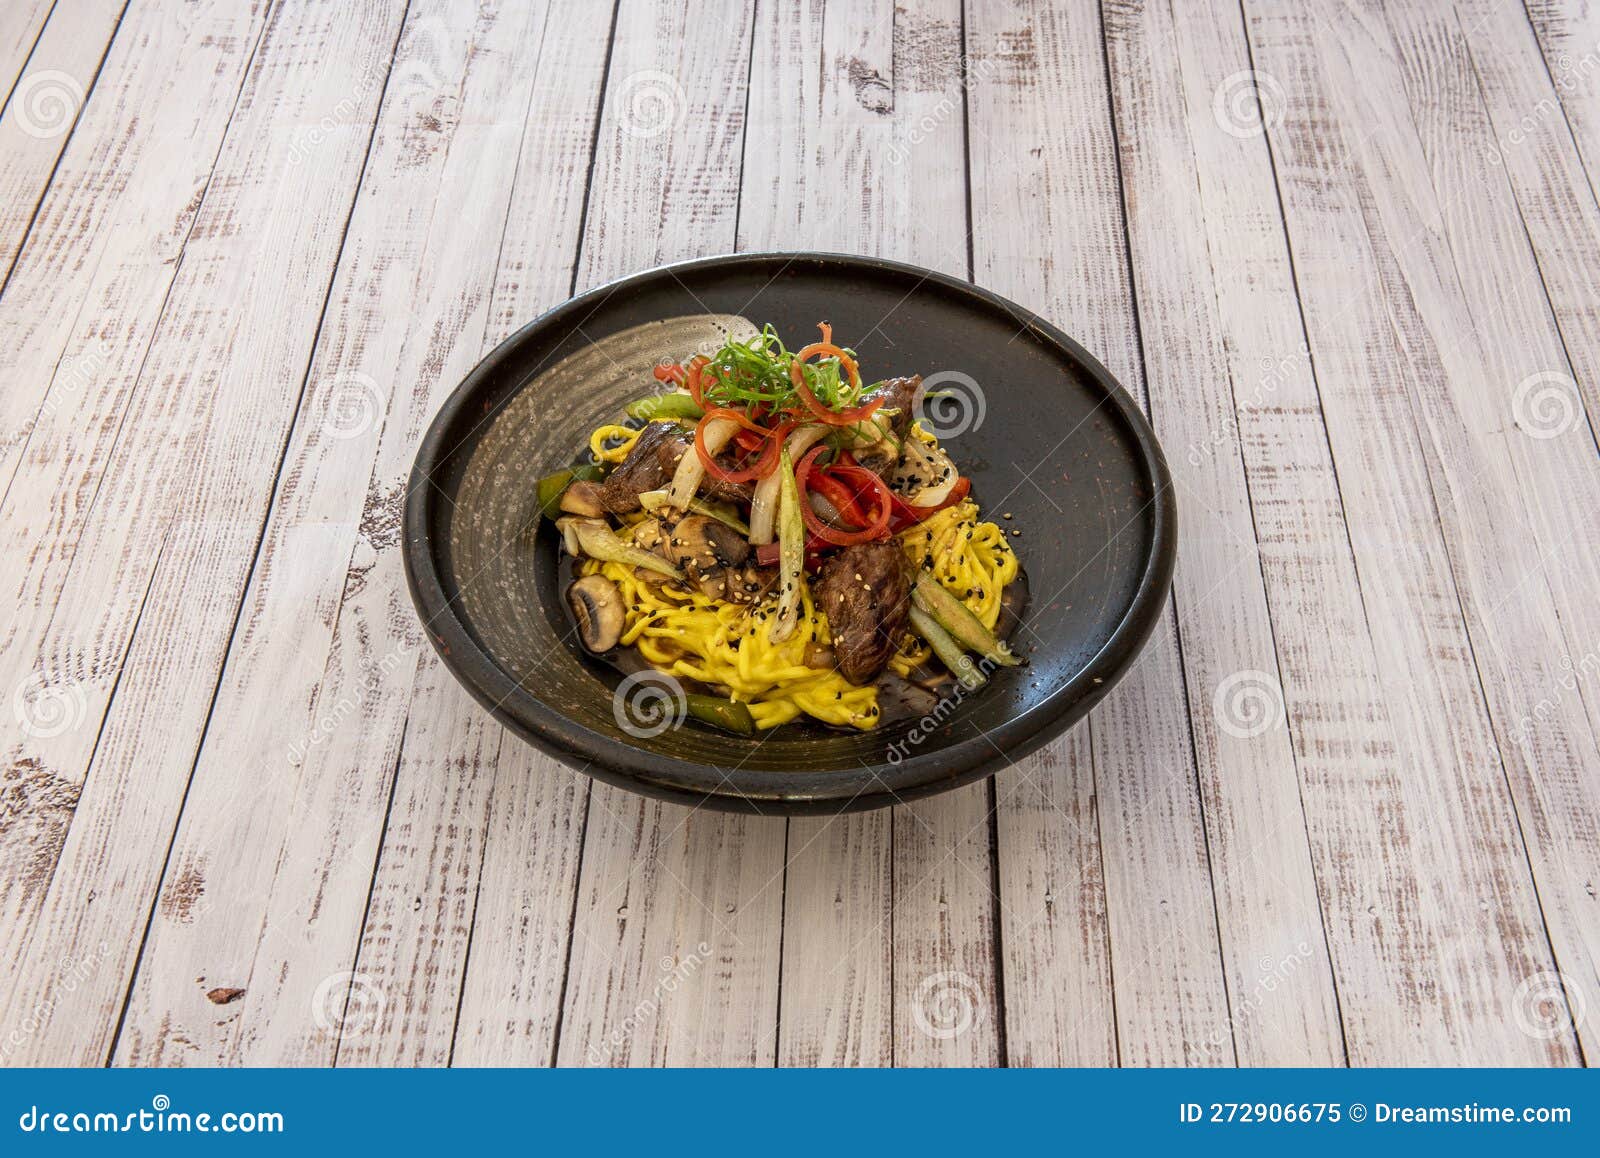 the dish is the local peruvian version of chifa gastronomy, of